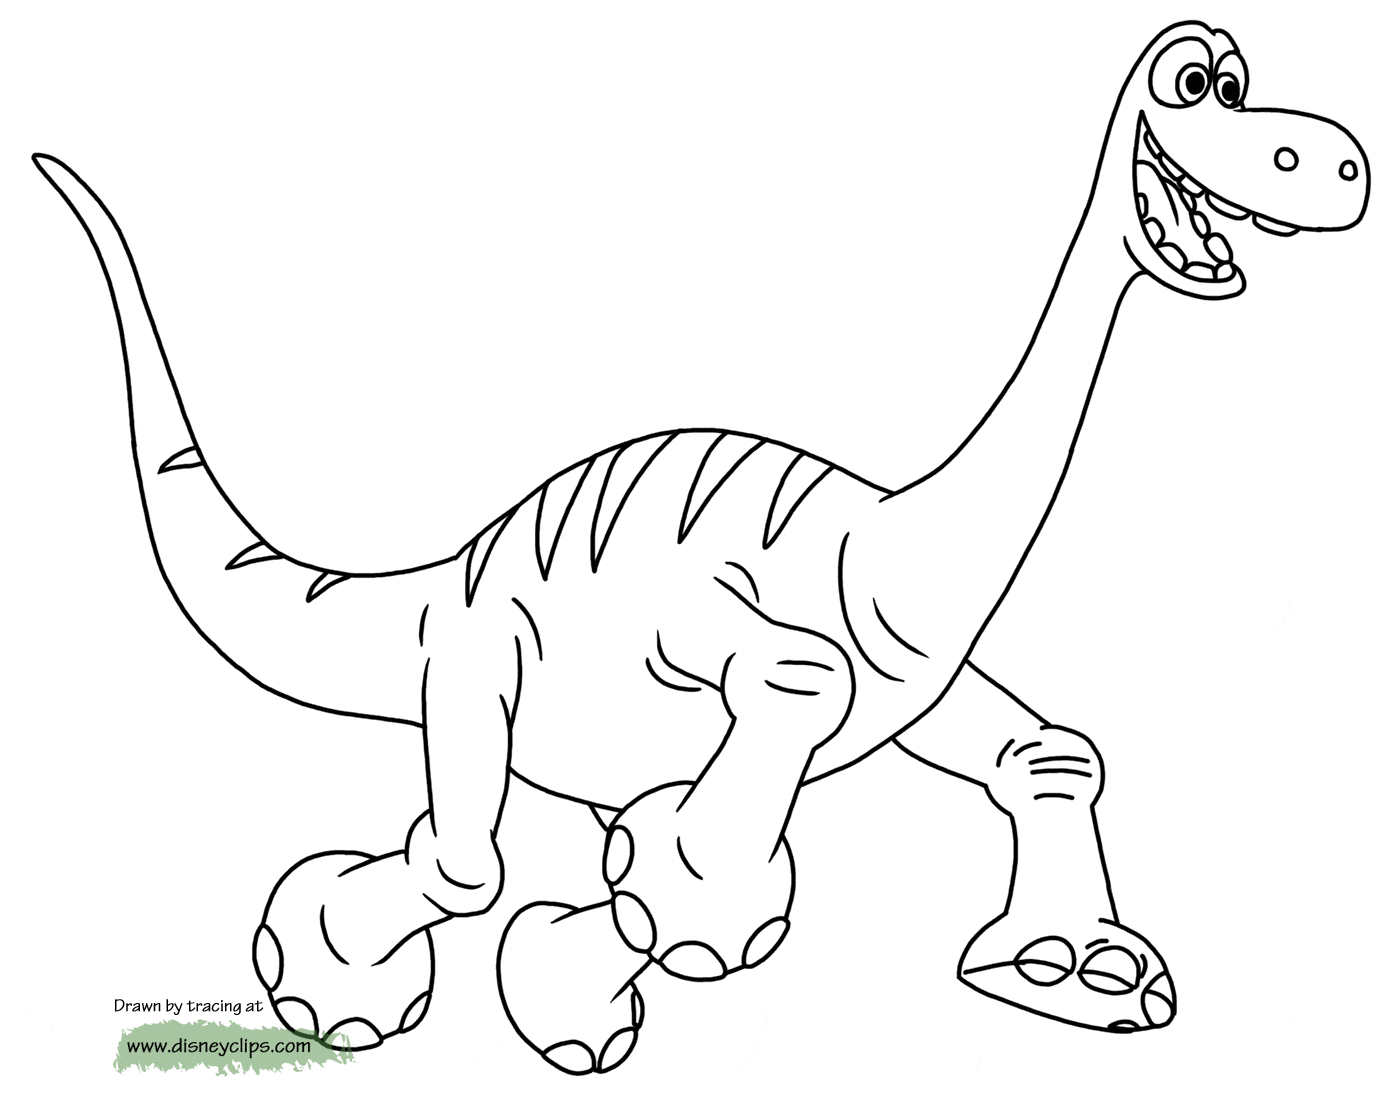 Download The Good Dinosaur Coloring Pages | Disneyclips.com